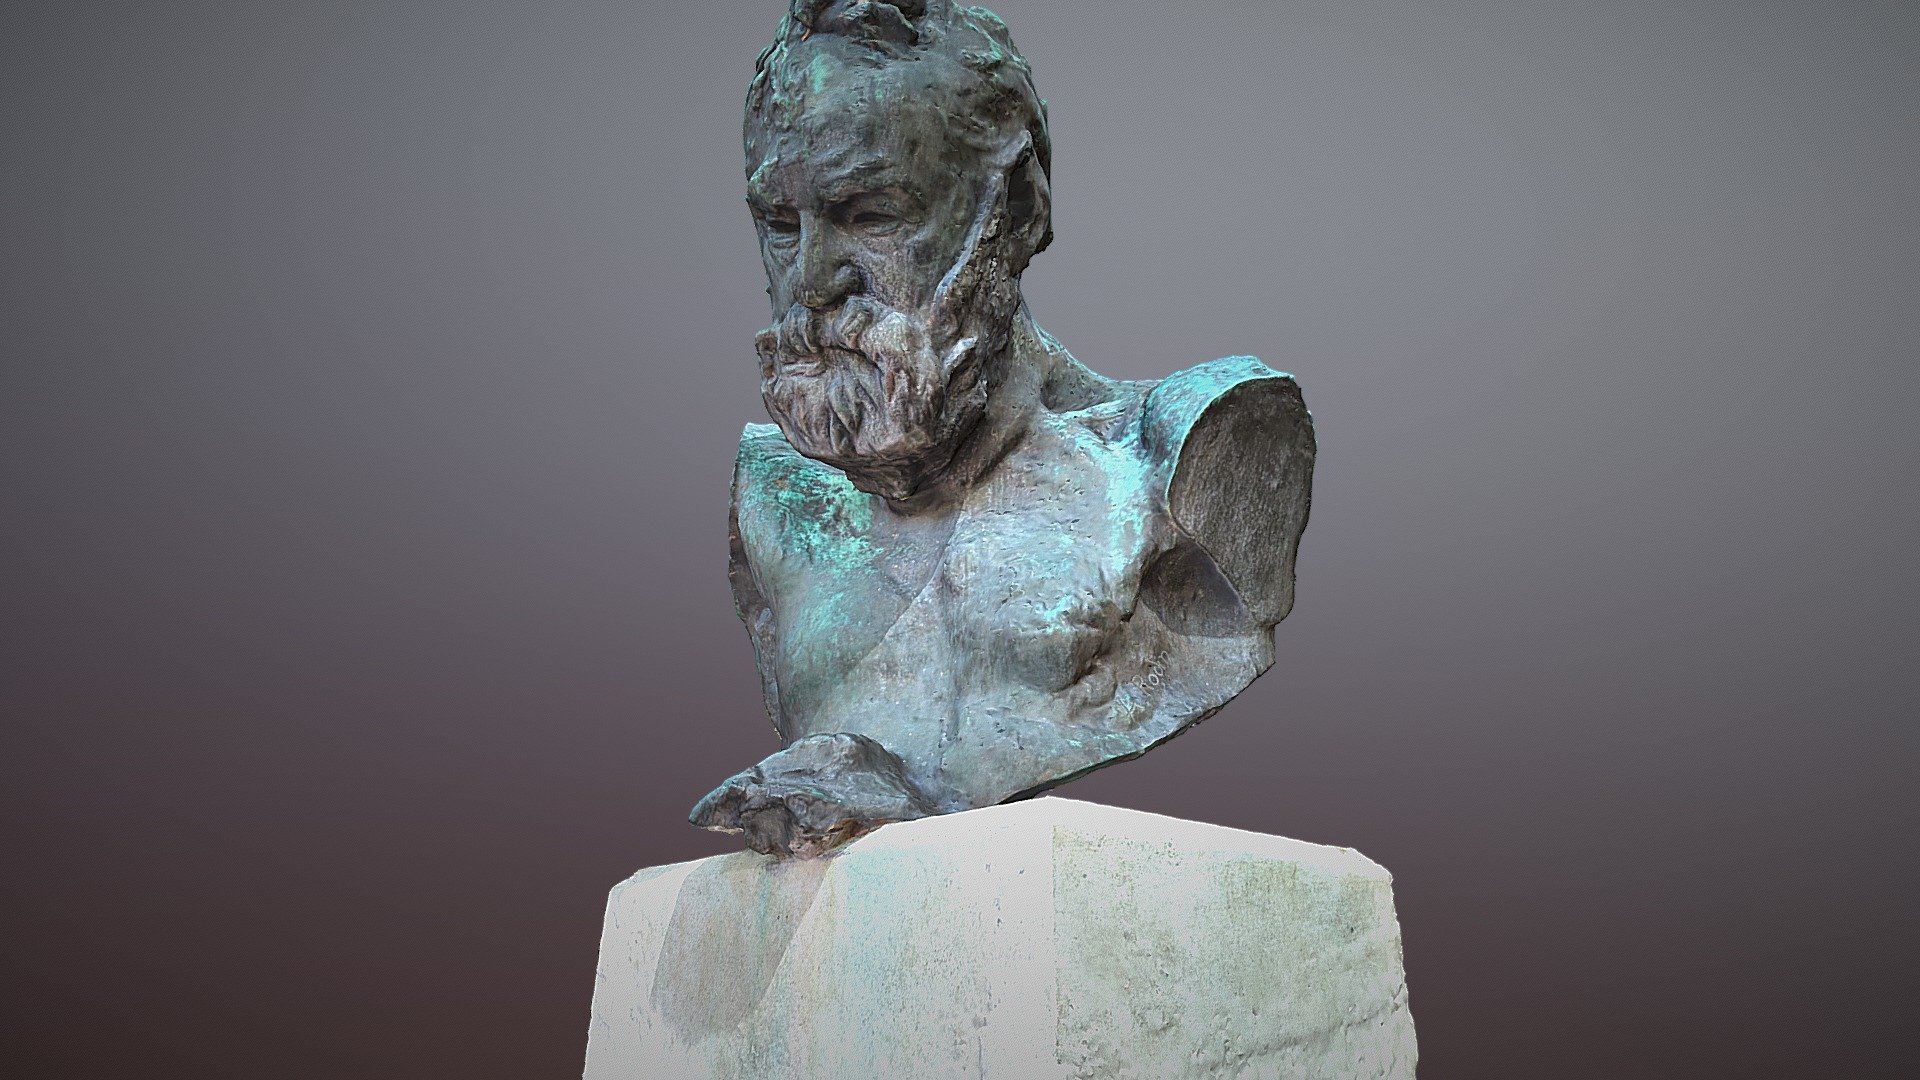 Sculpture Victor Hugo by Auguste Rodin. Jardine serres d'Auteuil at Garden of poetese Paris France
In the 16th arrondissement, in the streets of the poet square along the Garden of Serres d'Auteuil,  will meet sculptures.

**Created in RealityCapture by Capturing Reality by Photographer Daryoush Tahmasebi, from 151 images in 00h:31m:19s 3d model